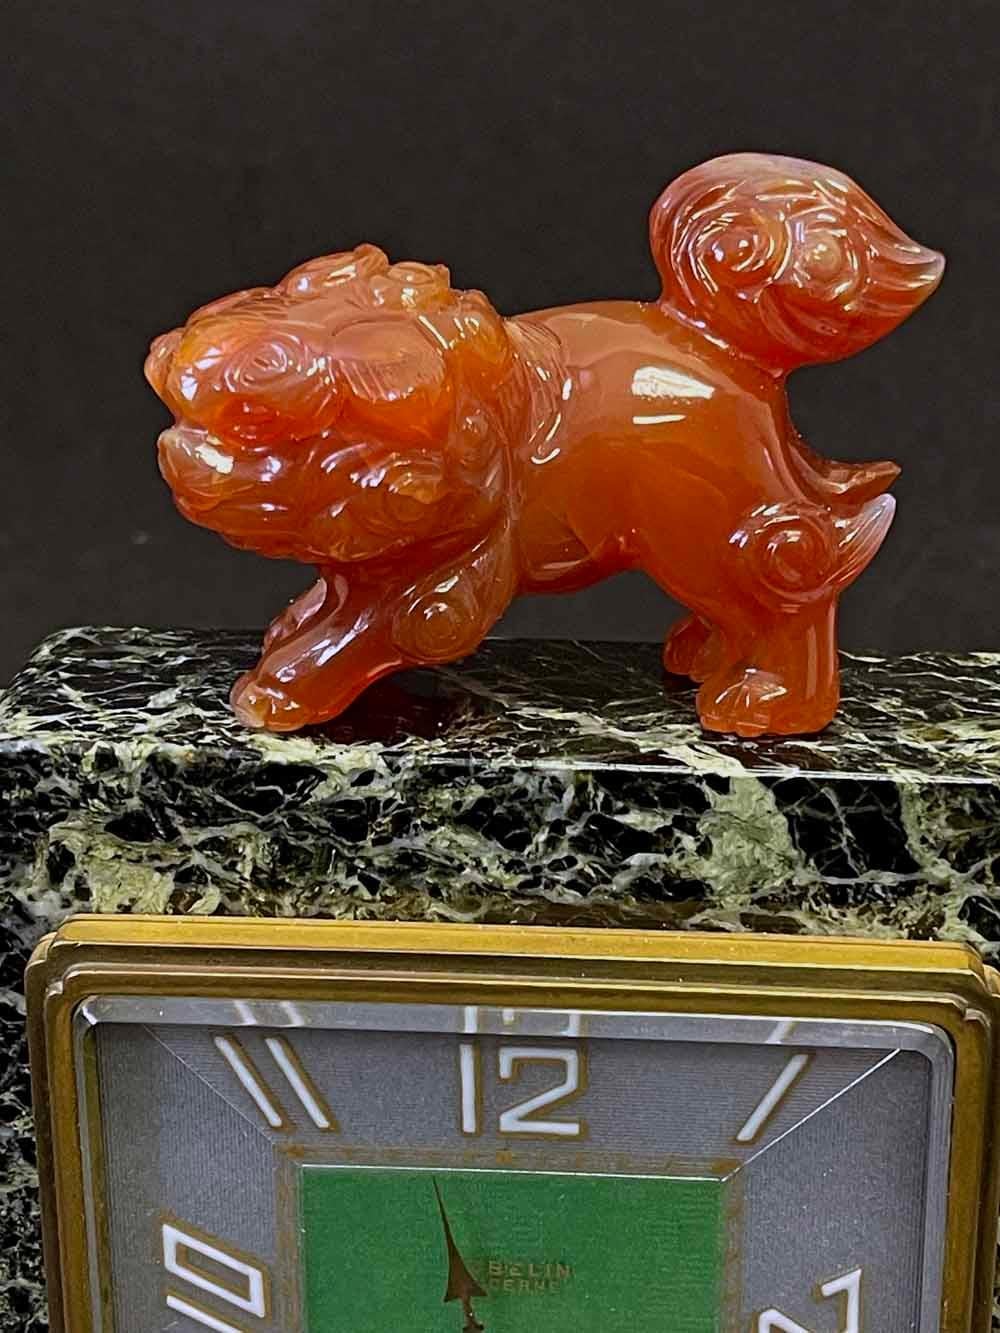 Bold and elegant, this rare -- possibly unique -- Art Deco table clock in the Chinese manner by the renowned Gübelin firm in Switzerland is a close cousin to the impossibly rarified clocks produced by Cartier in the same period.  Like Cartier,